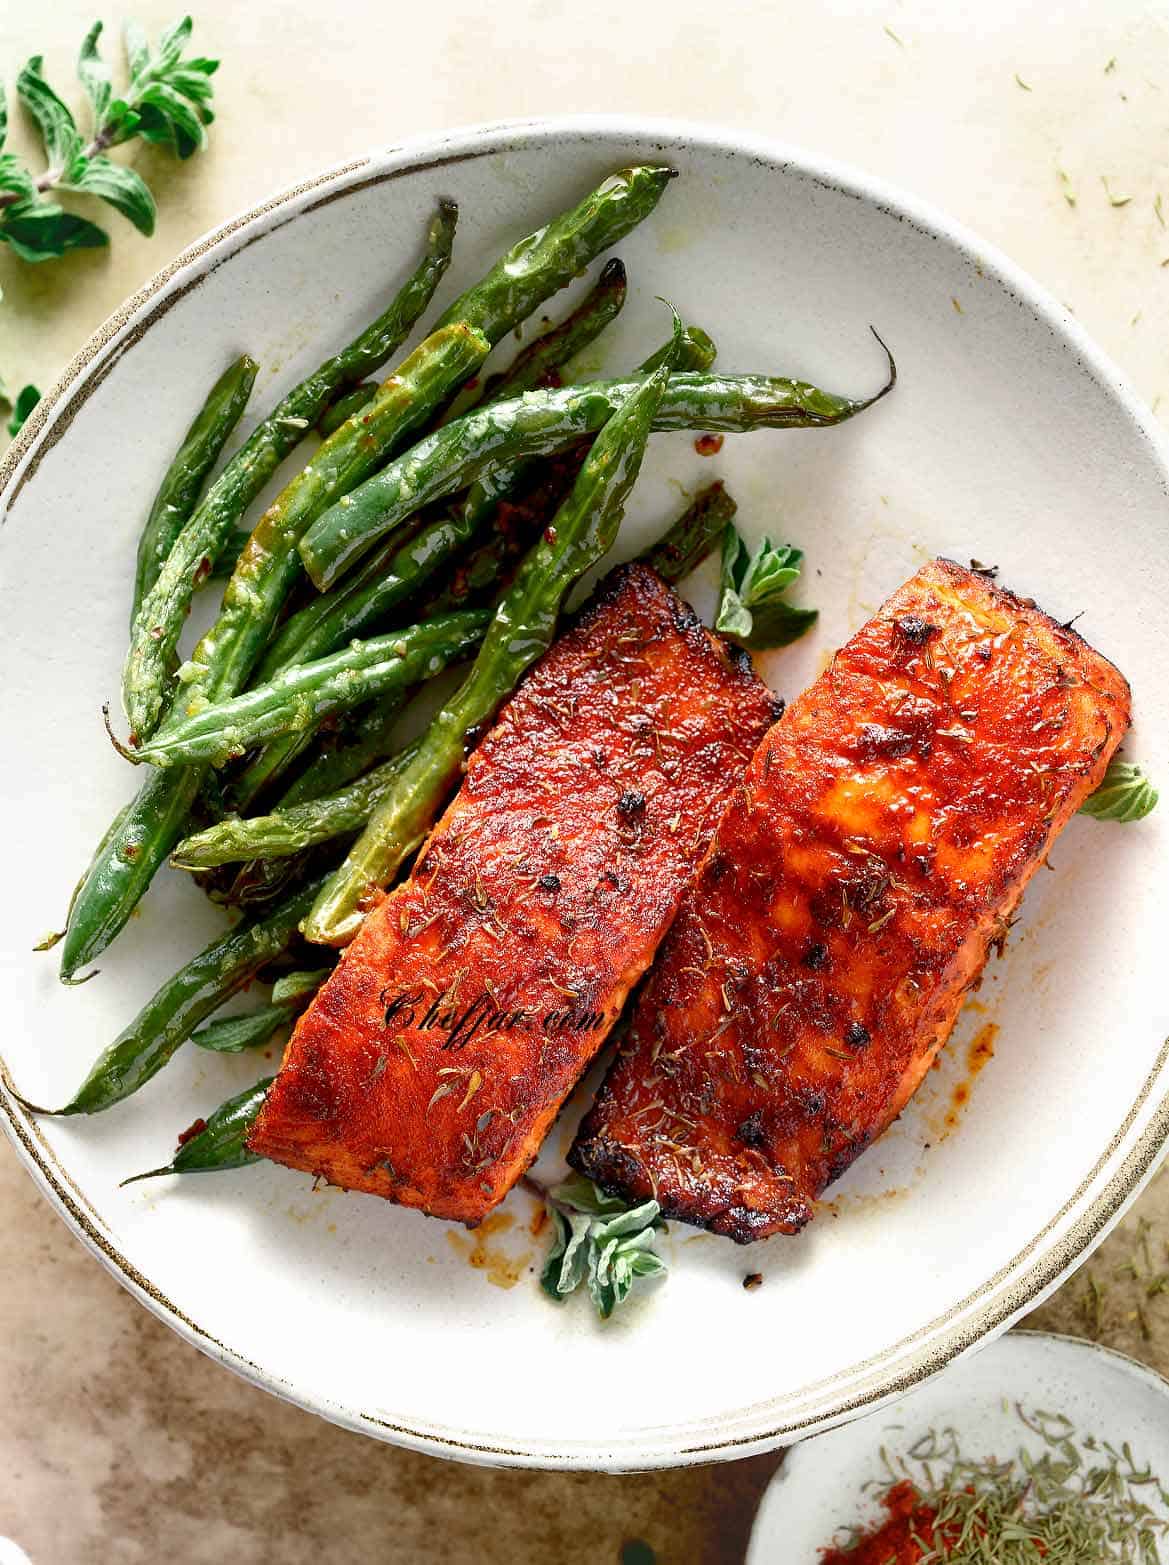 Leftover salmon on a white plate with green beans